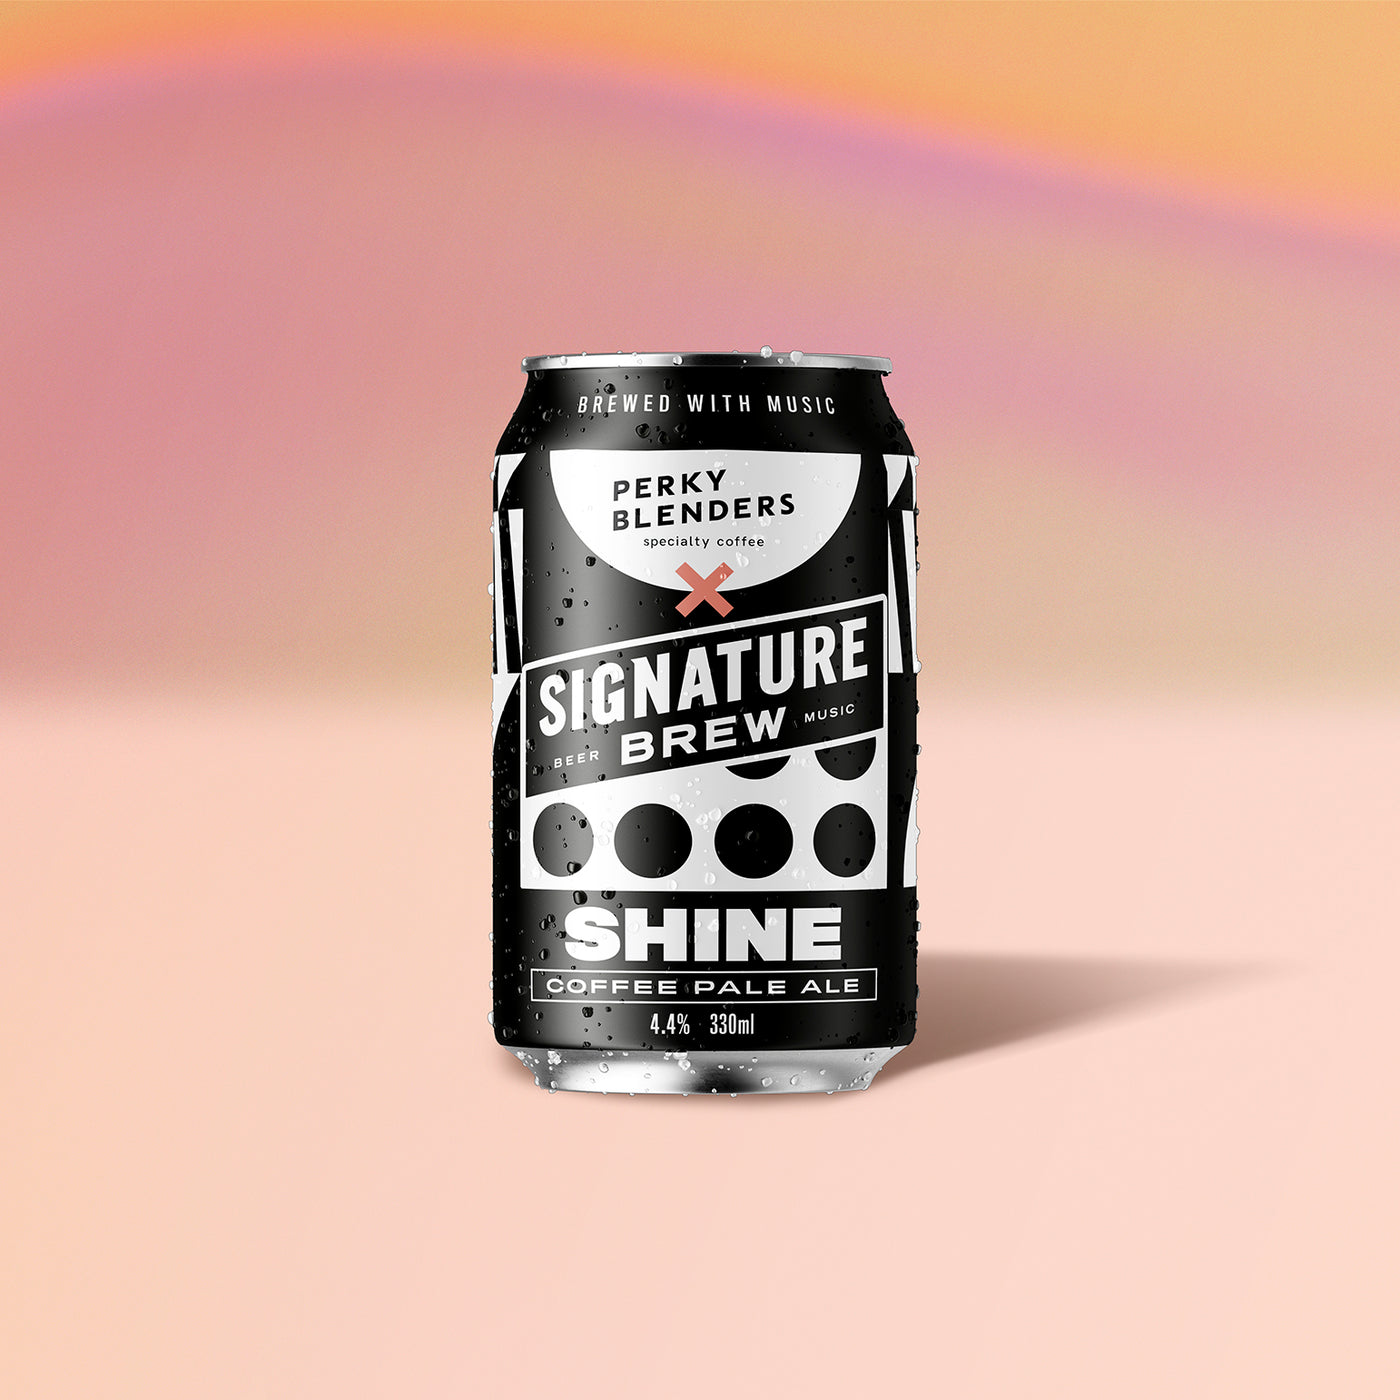 Rise & Shine - Perky Blenders x Signature Brew - Coffee & Beer Collab